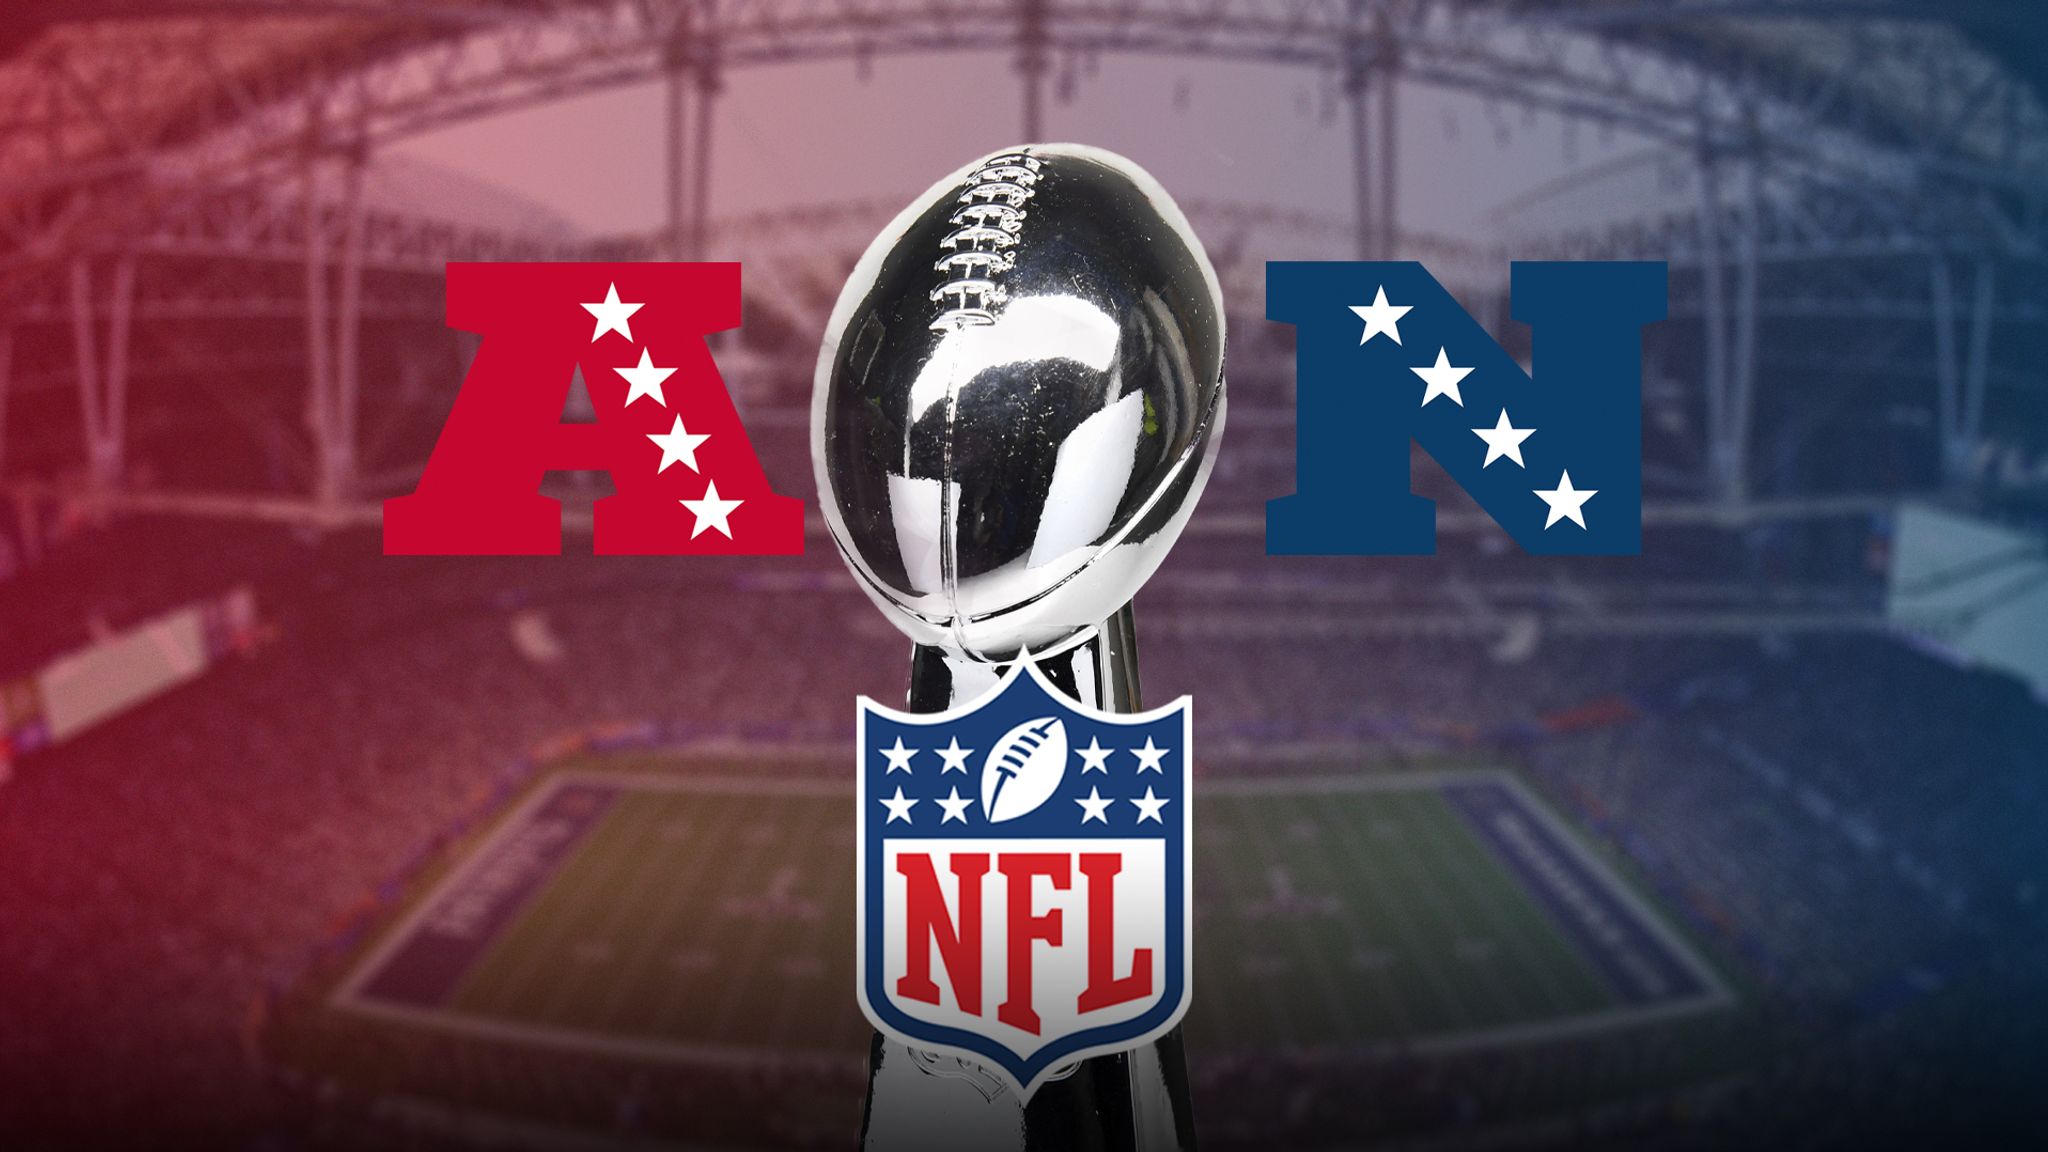 NFL playoff schedule: What games are on today? TV channels, times